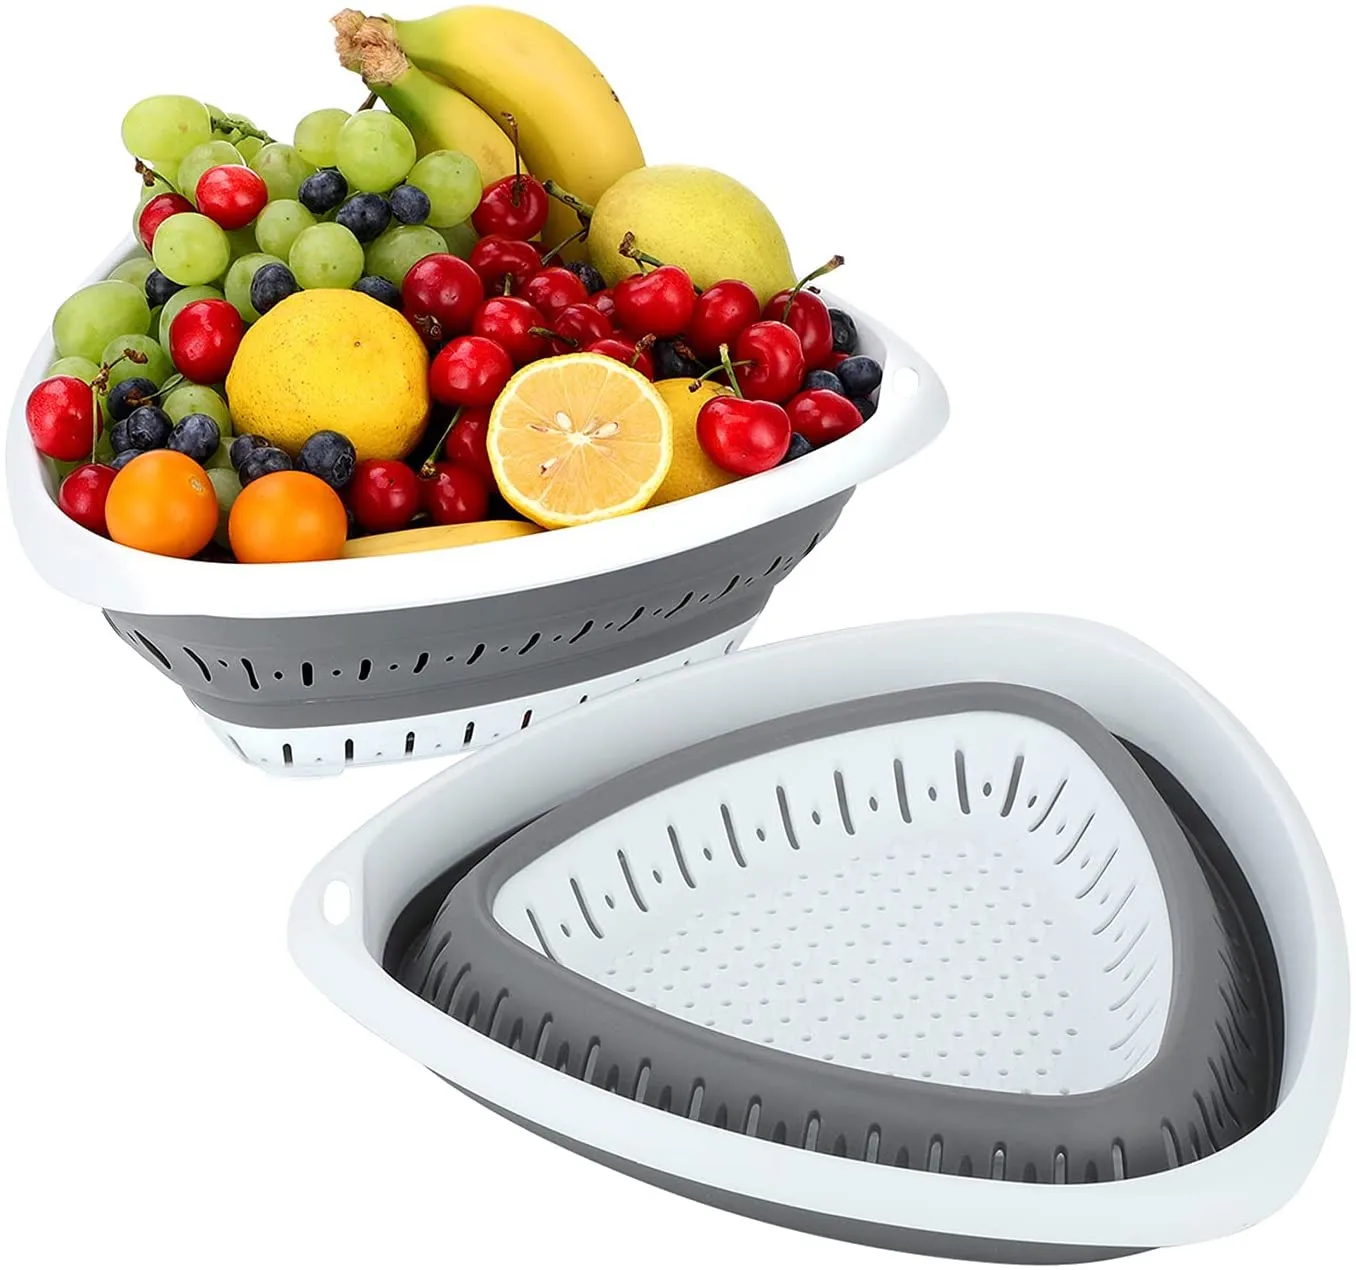 OEM & ODM Kitchen Foldable Strainers for Fruit Vegetable and Pasta Customized Dishwasher Basket Collapsible Silicone Colander